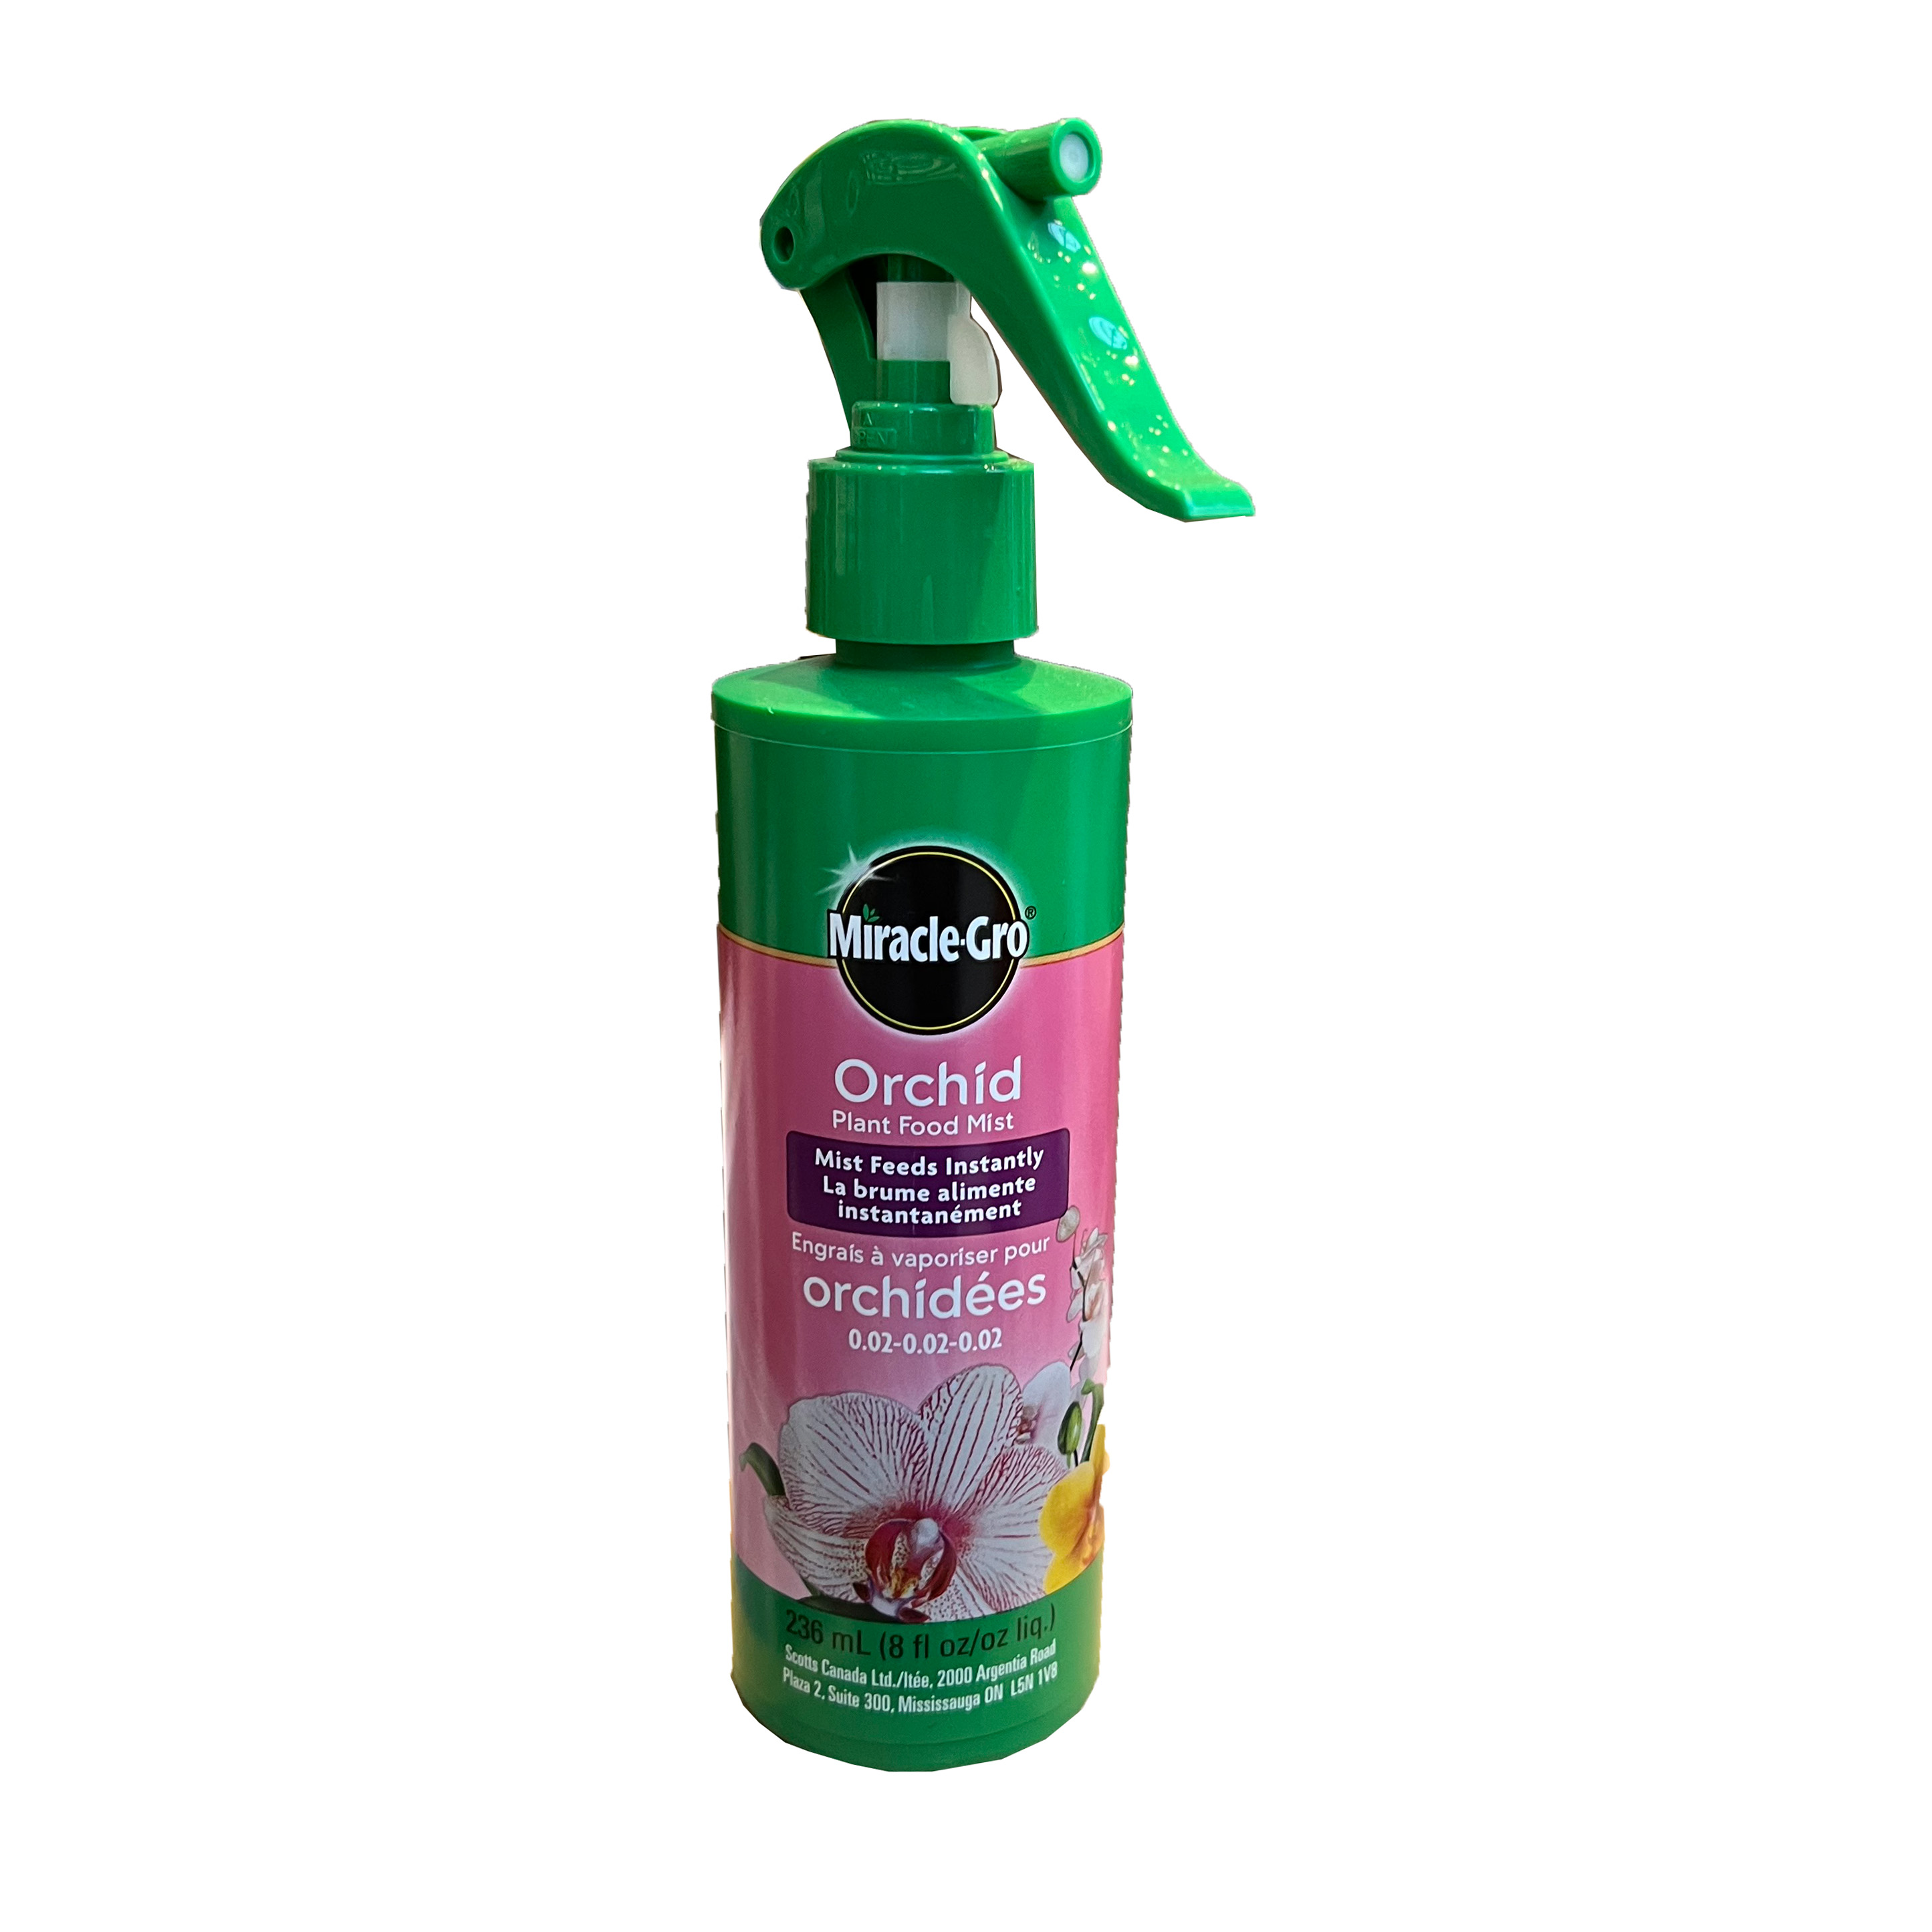 Miracle Gro Orchid Plant Food Mist 0.02-0.02-0.02 236ml  